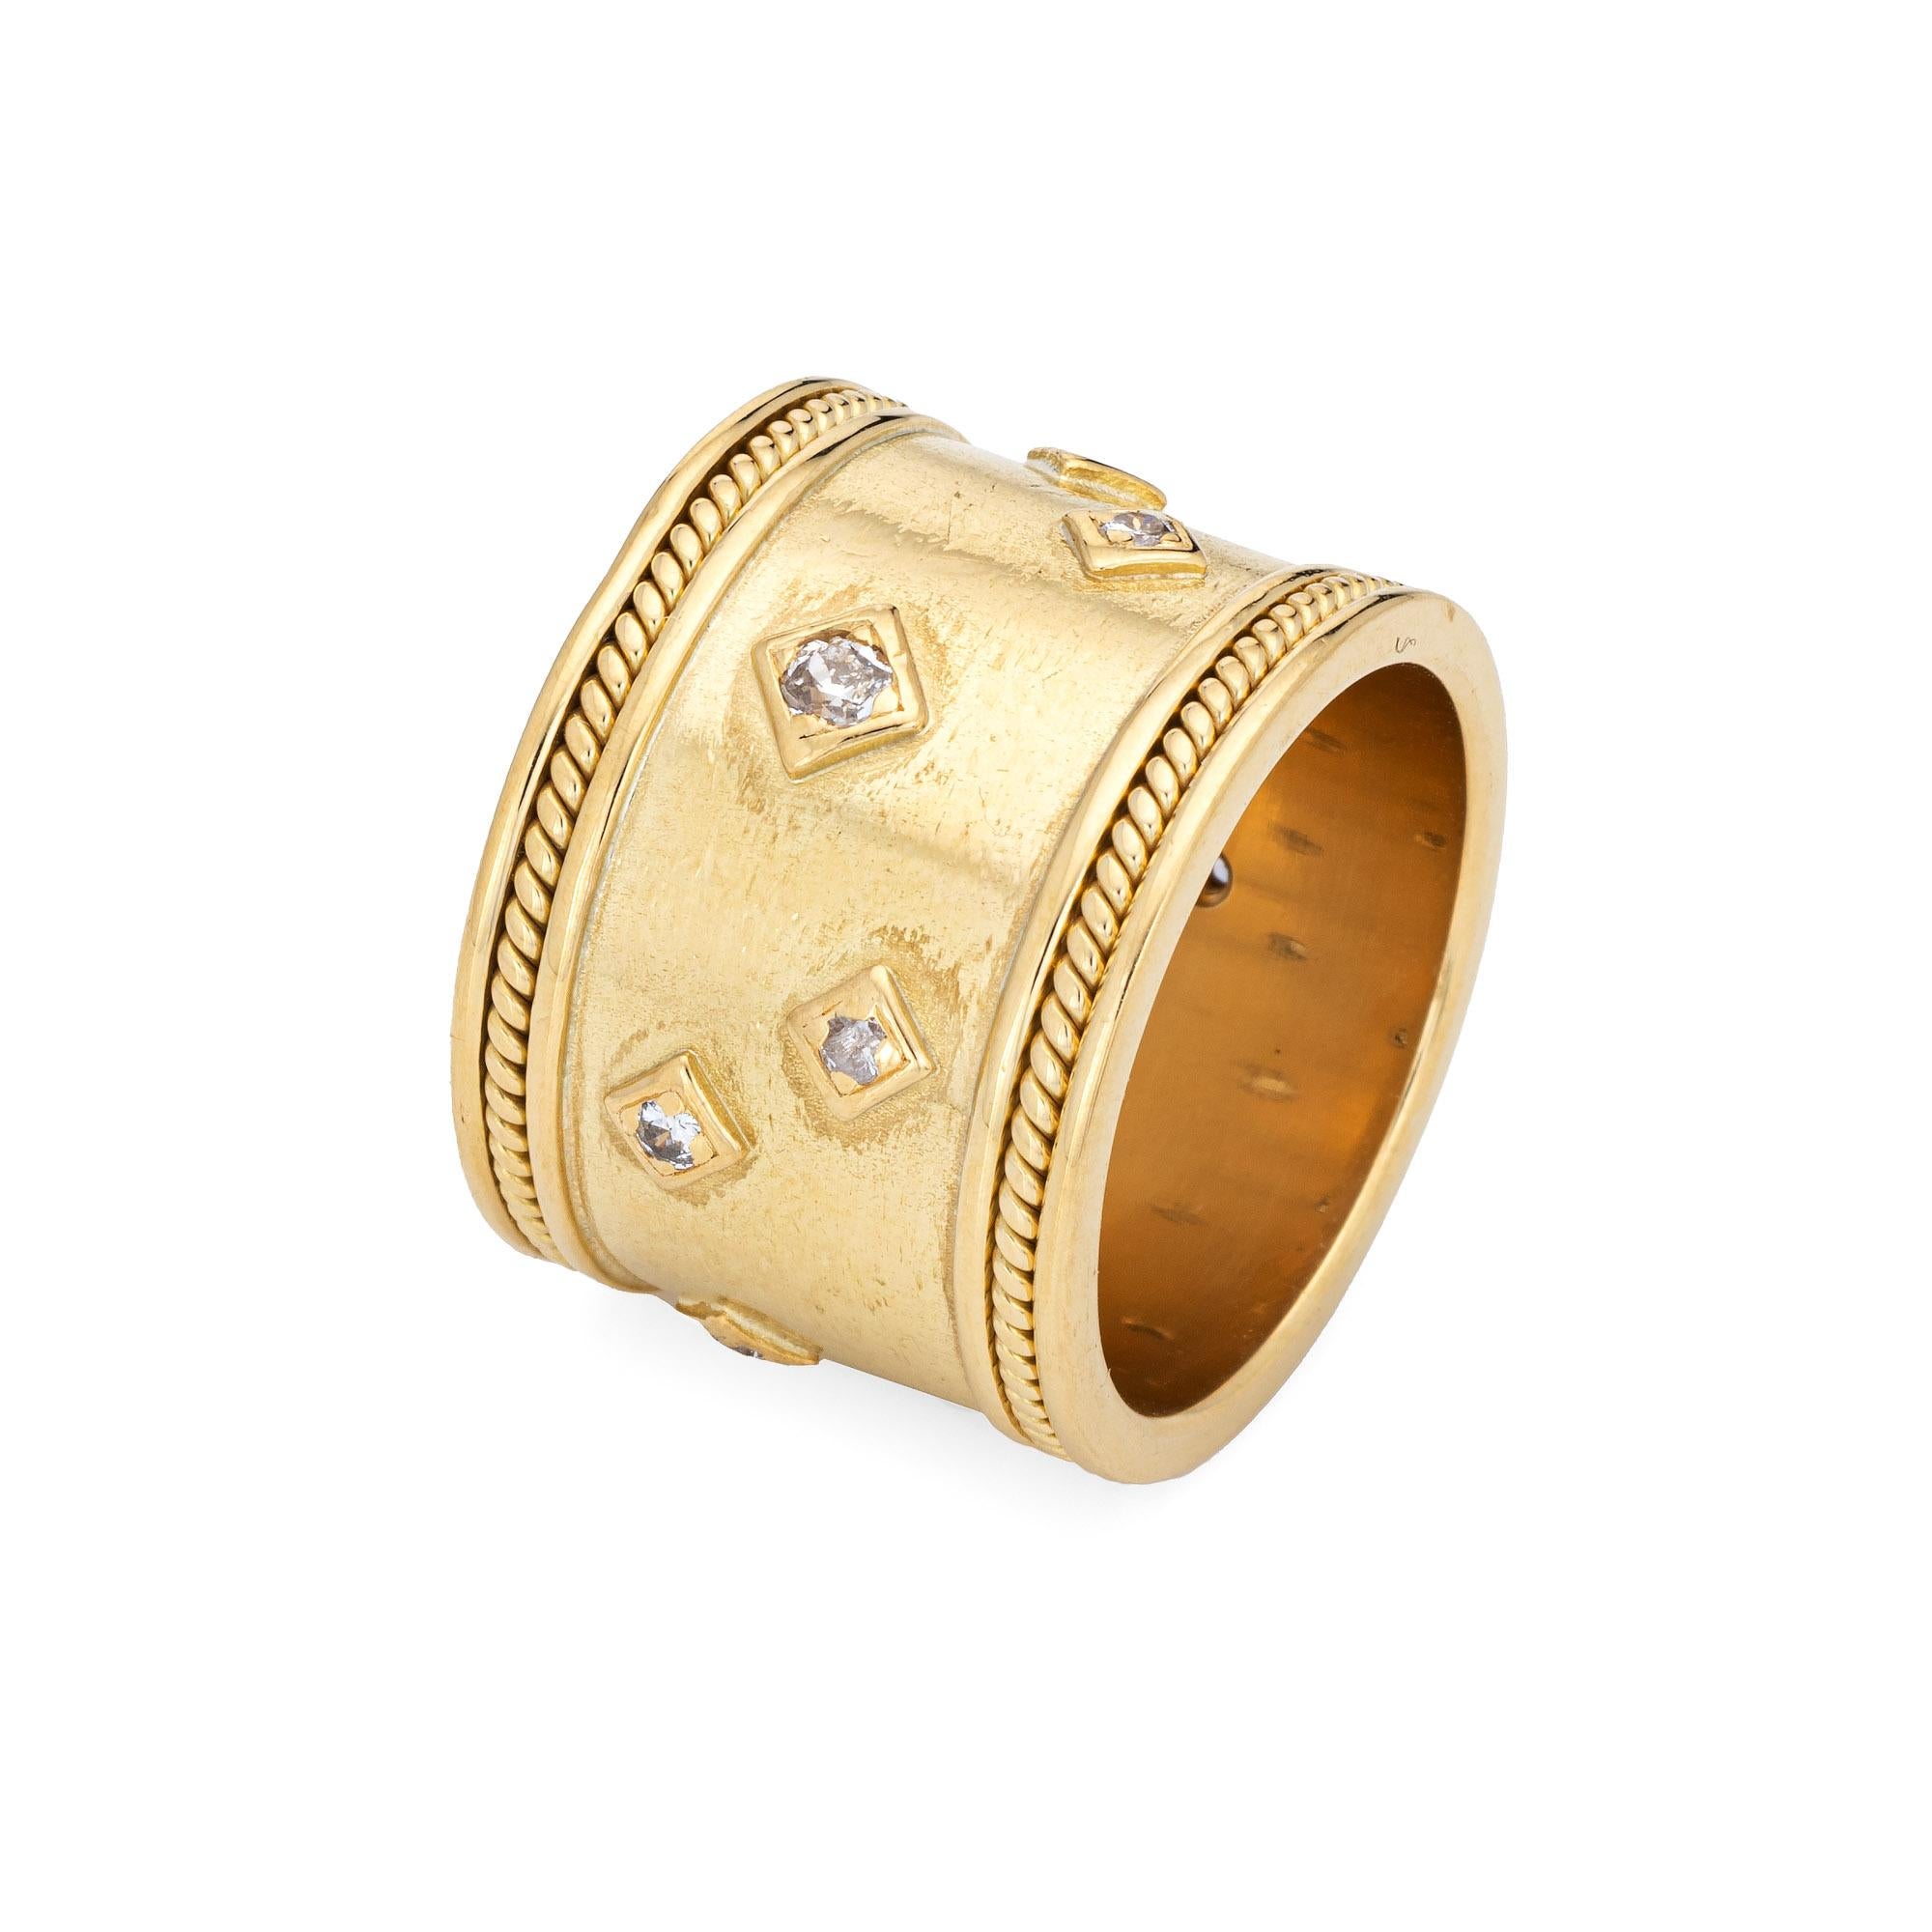 Stylish vintage wide band cigar diamond ring crafted in 18 karat yellow gold. 

Diamonds total an estimated 0.15 carats (estimated at H-I color and SI1-I1 clarity). 

The wide band ring (16mm - 0.62 inches) makes a great statement on the hand. The